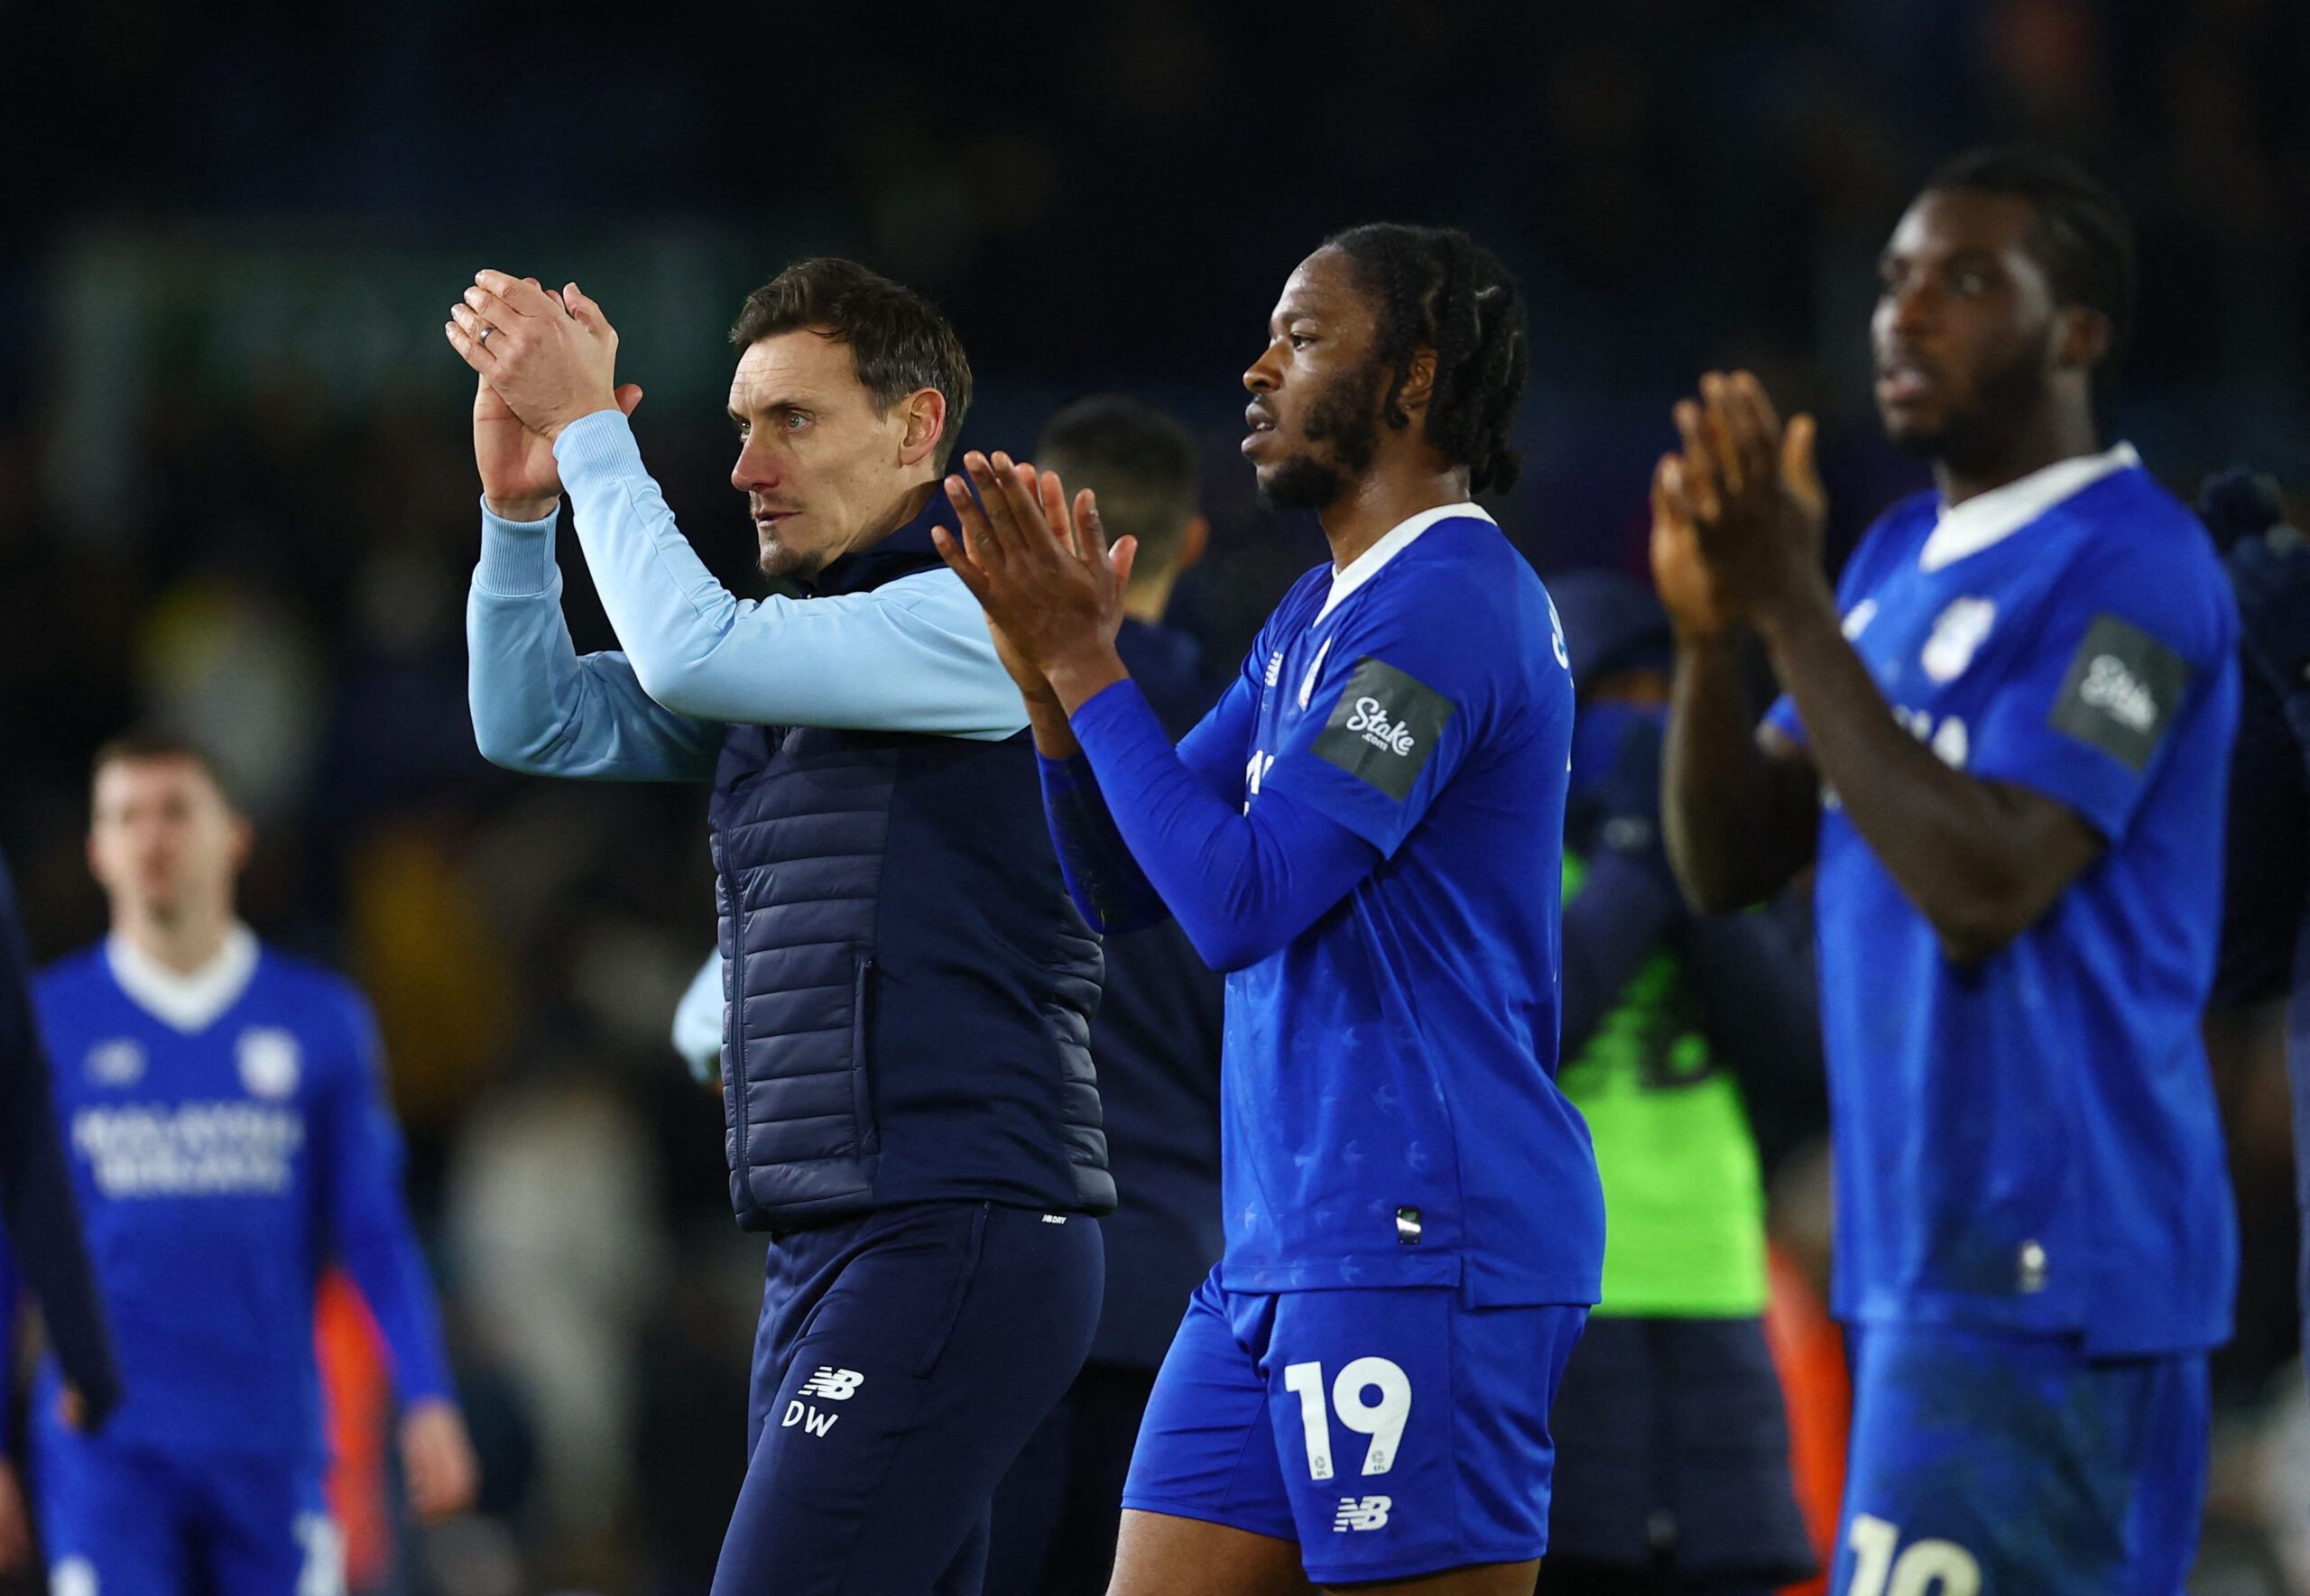 Soccer Football - FA Cup - Leeds United v Cardiff City - Elland Road, Leeds, Britain - January 18, 2023 Cardiff City's interim manager Dean Whitehead with Romaine Sawyers after the match REUTERS/Molly Darlington